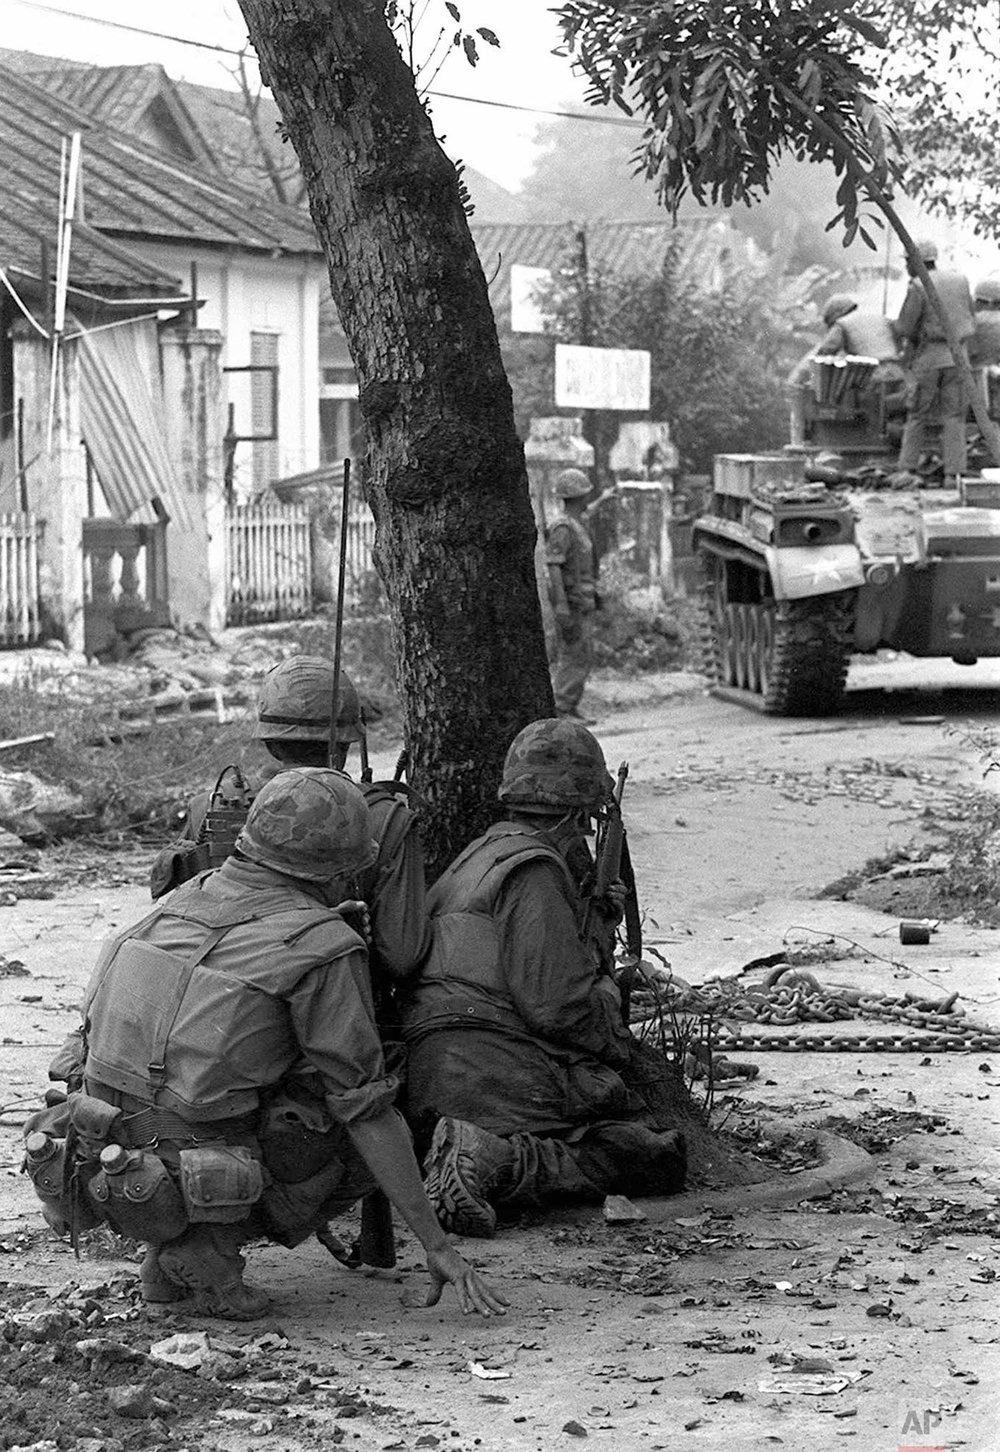  U.S. Marines, supplemented by a tank, take cover behind a tree near the southern bridgehead on the Perfume River, in Hue, Vietnam, Feb. 4, 1968 as they fight well-armed North Vietnamese troops for the fifth straight day. The communists continued to 